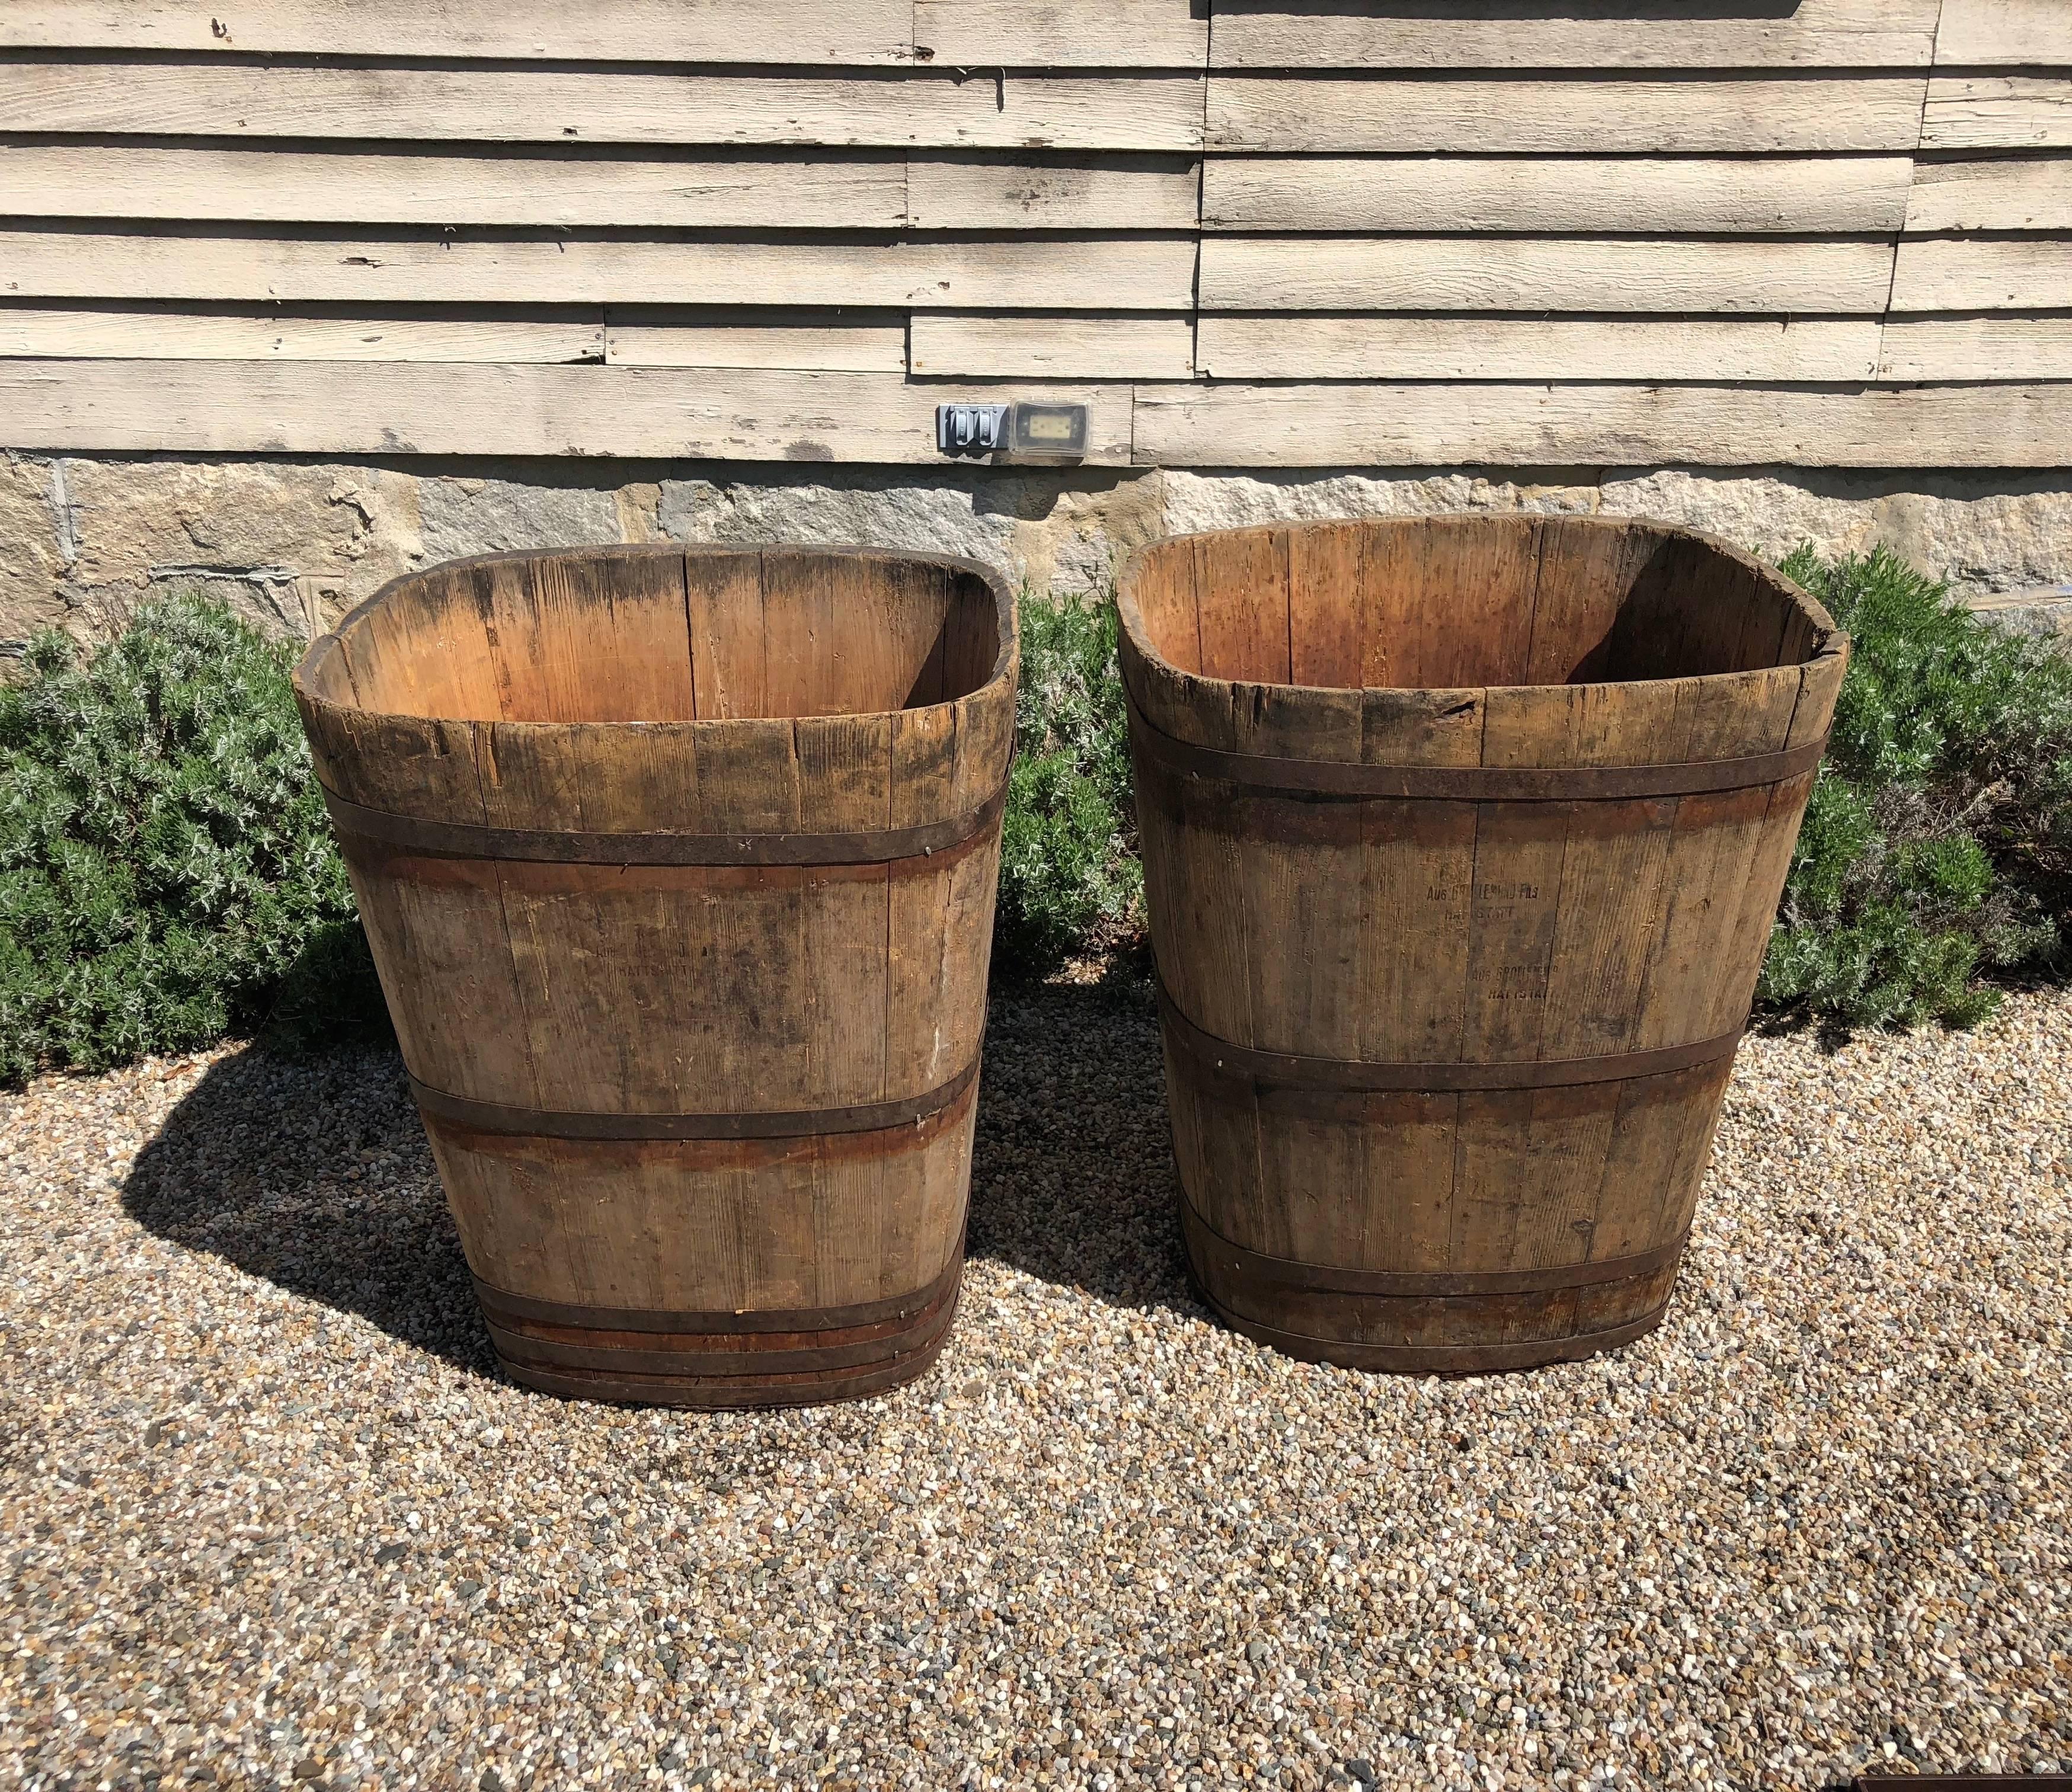 On one of our most recent buying trips, we were fortunate enough to source four pairs of very large wooden tubs that were used as Master Collection Vessels for the grape harvest in Alsace. At least one in each pair is stamped by its maker, 